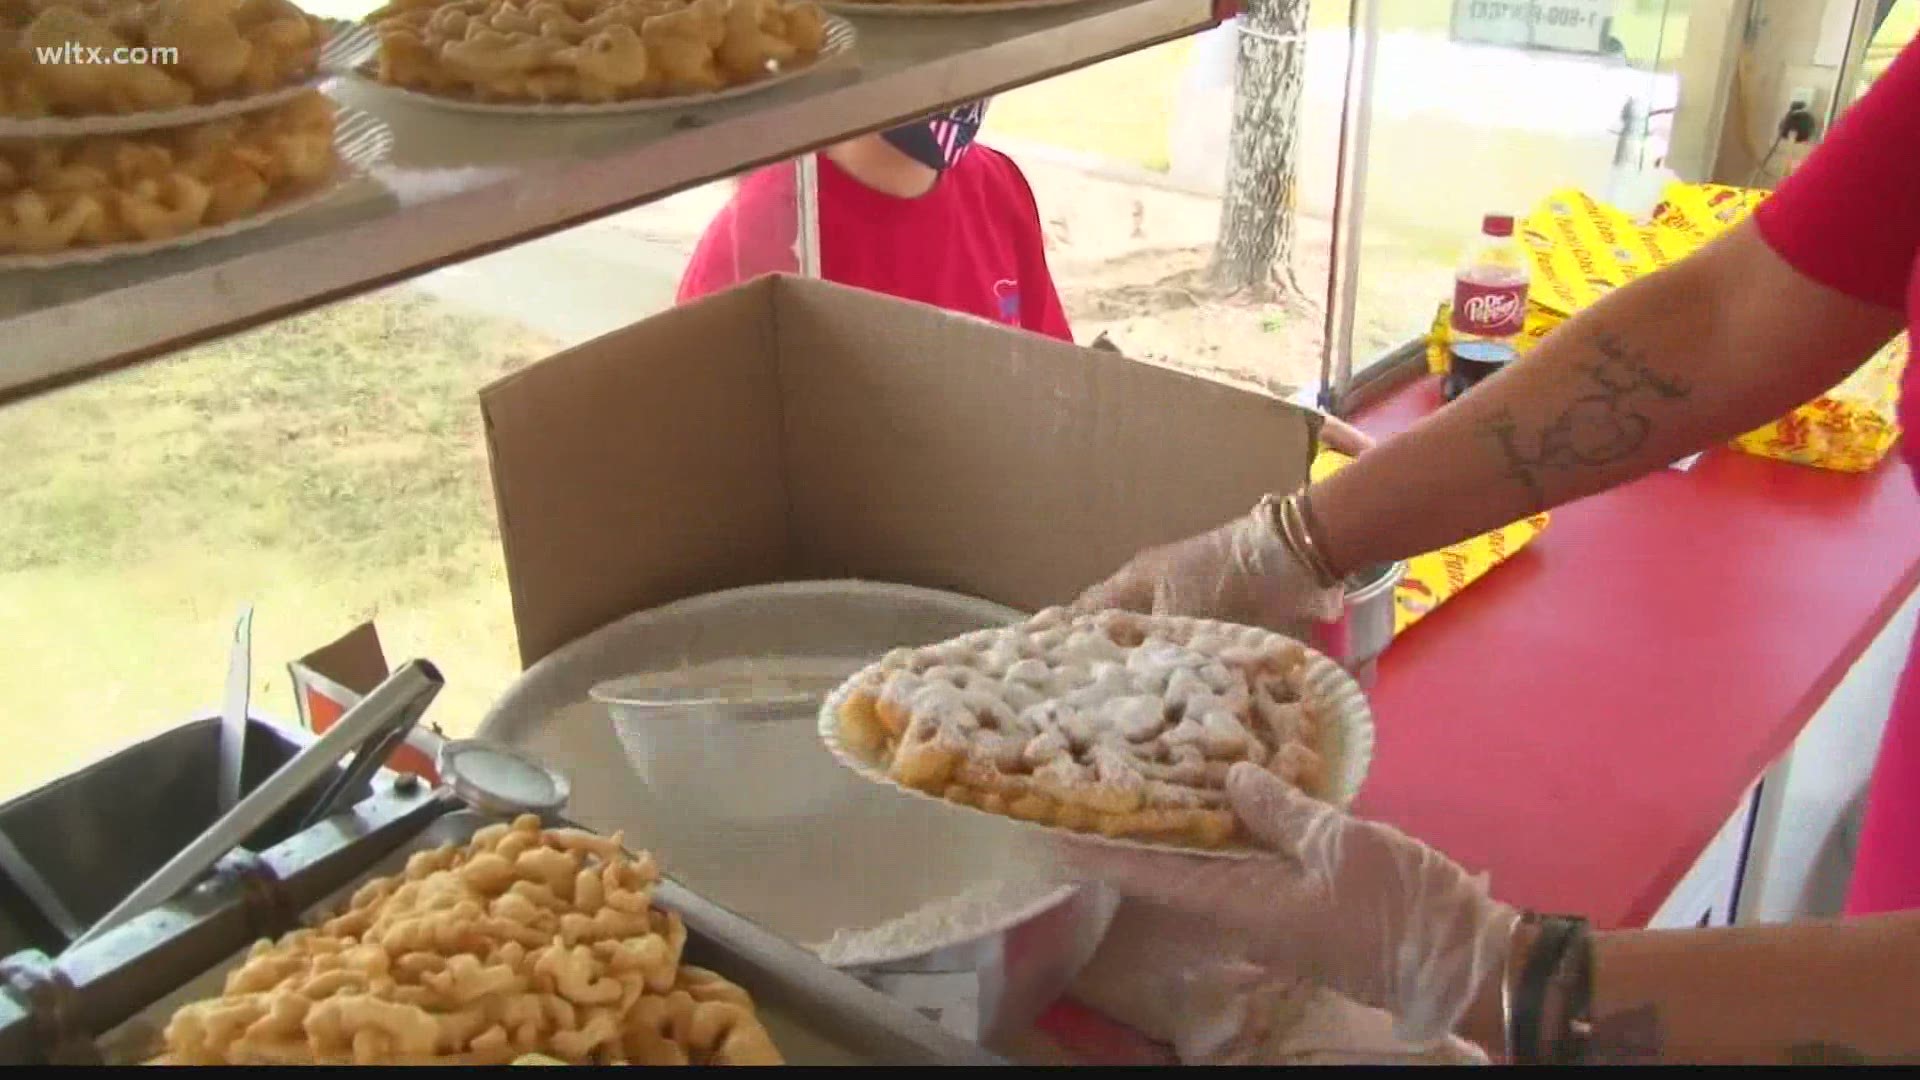 Are you craving turkey legs, Fiske fries, or funnel cakes? The South Carolina State Fair is bringing back their drive-through fair food event in April.